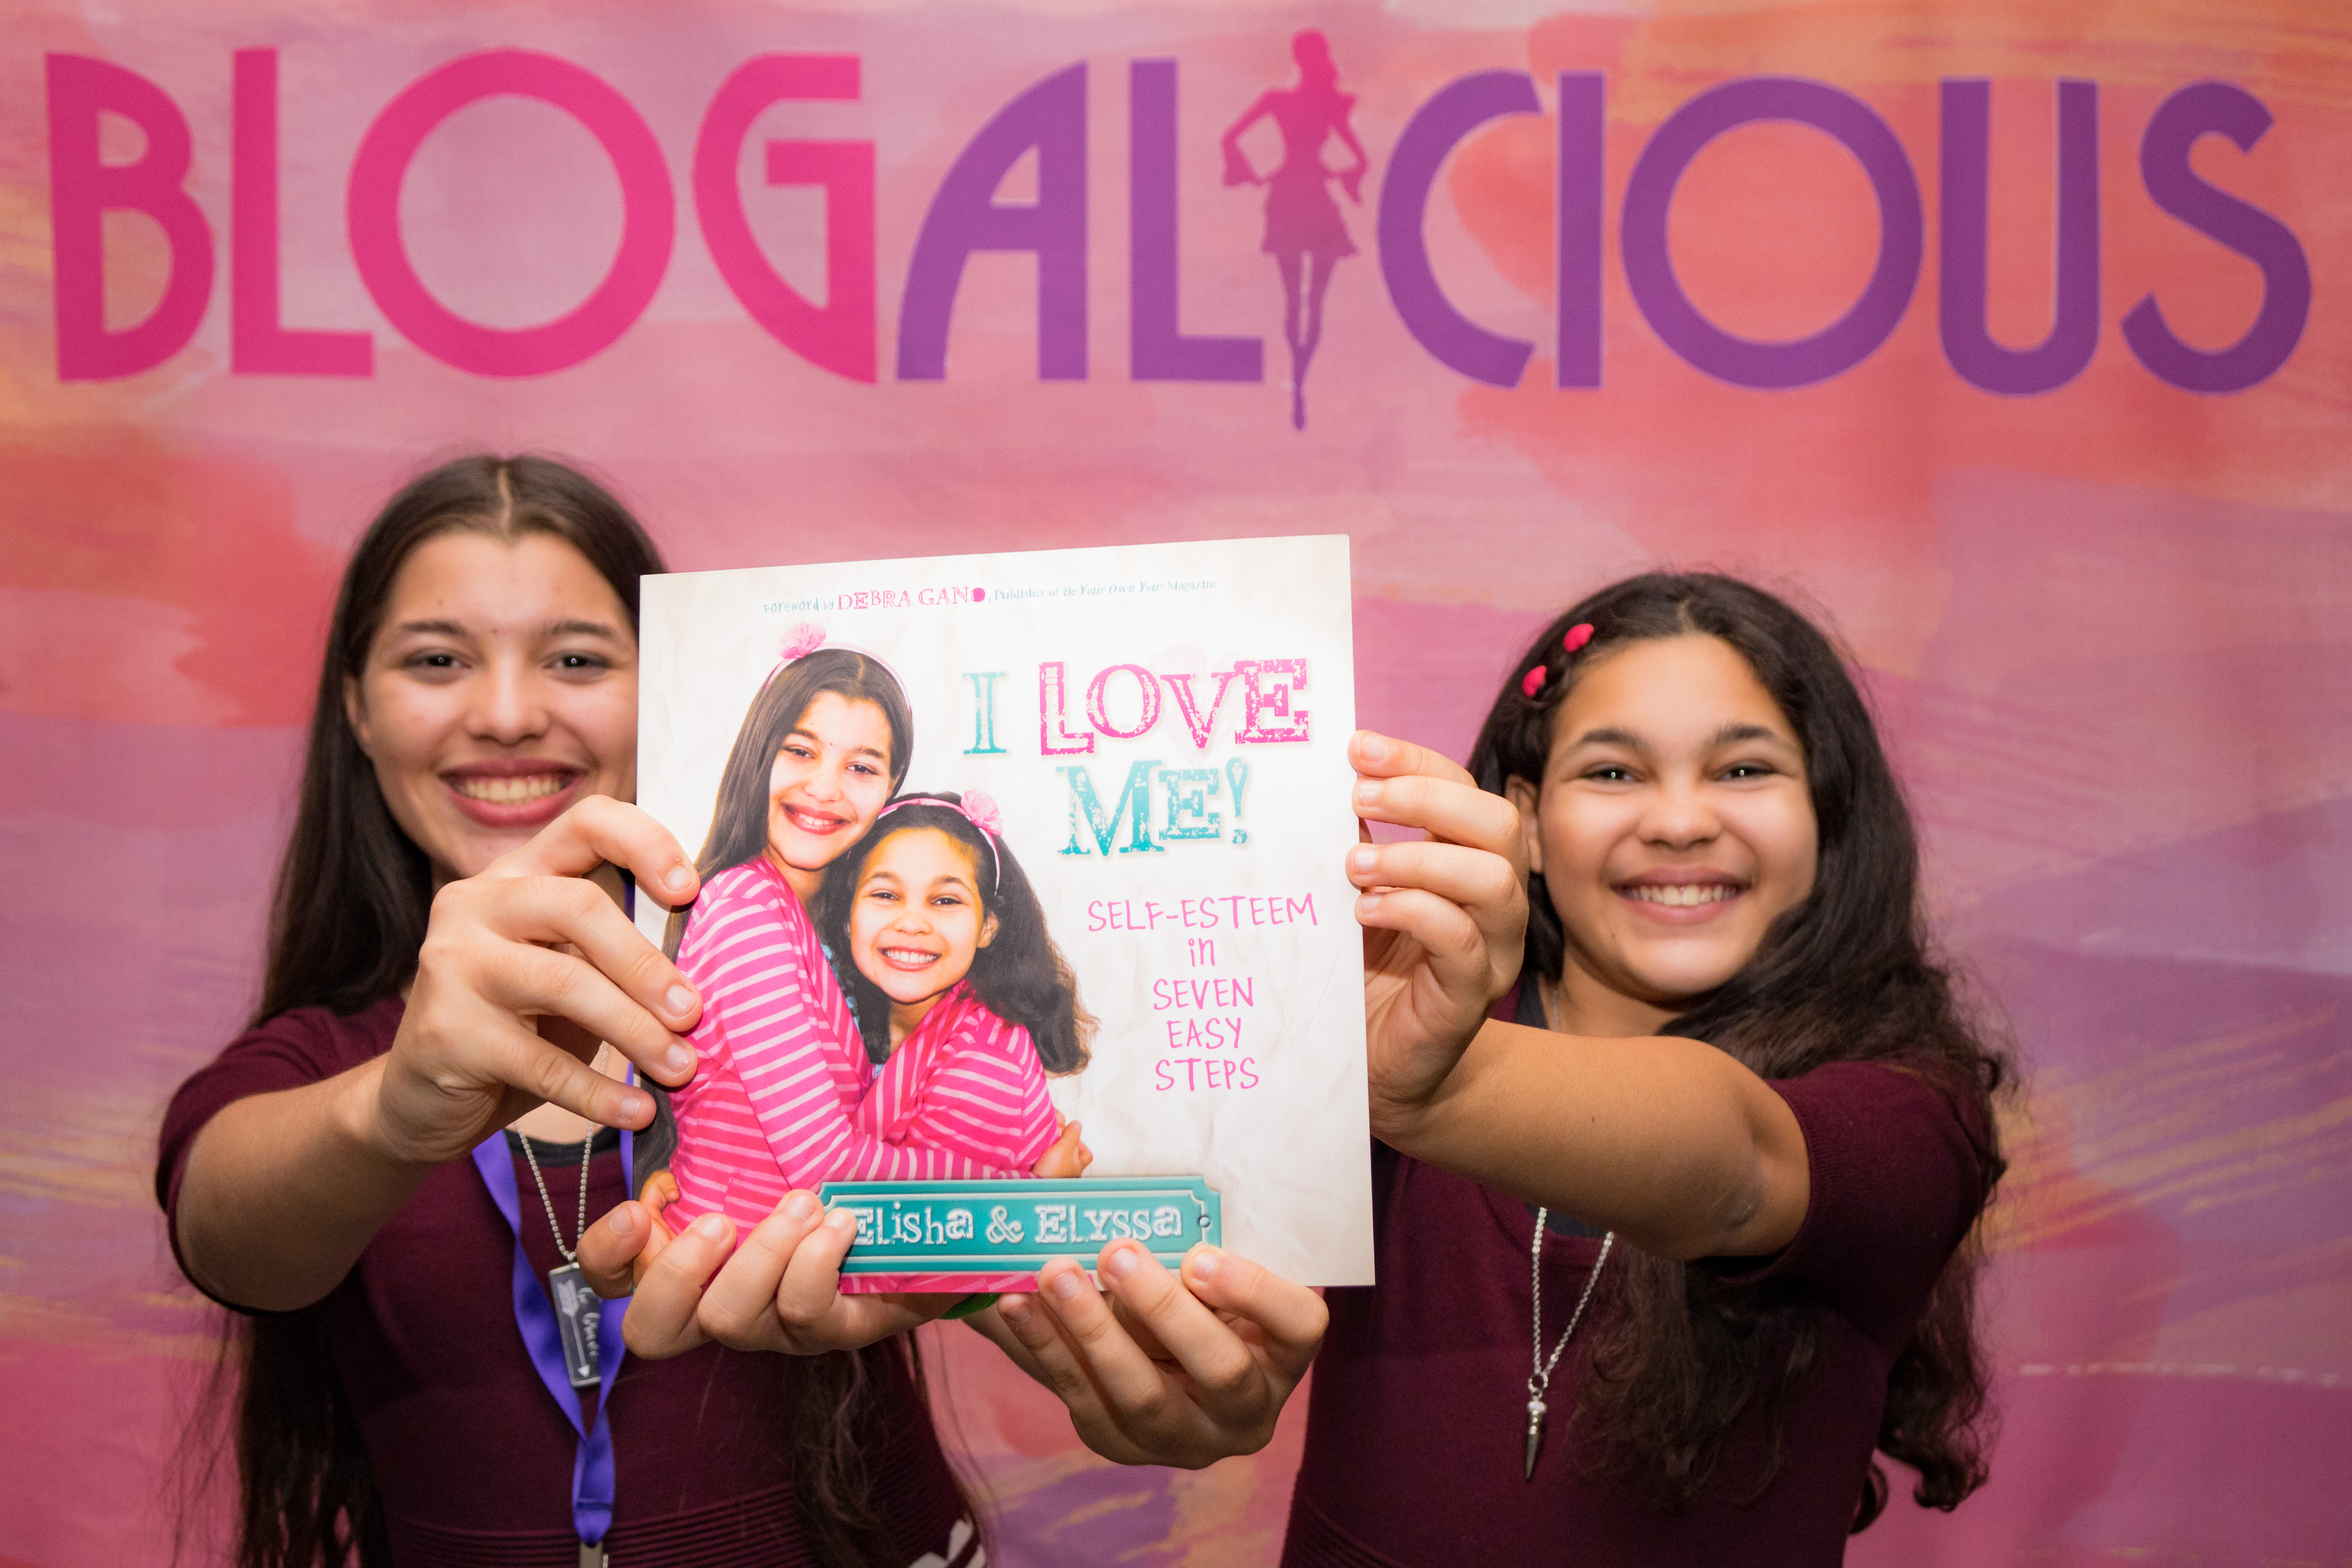 The WhollyART sisters at Blogalicious with their book, I Love ME! 